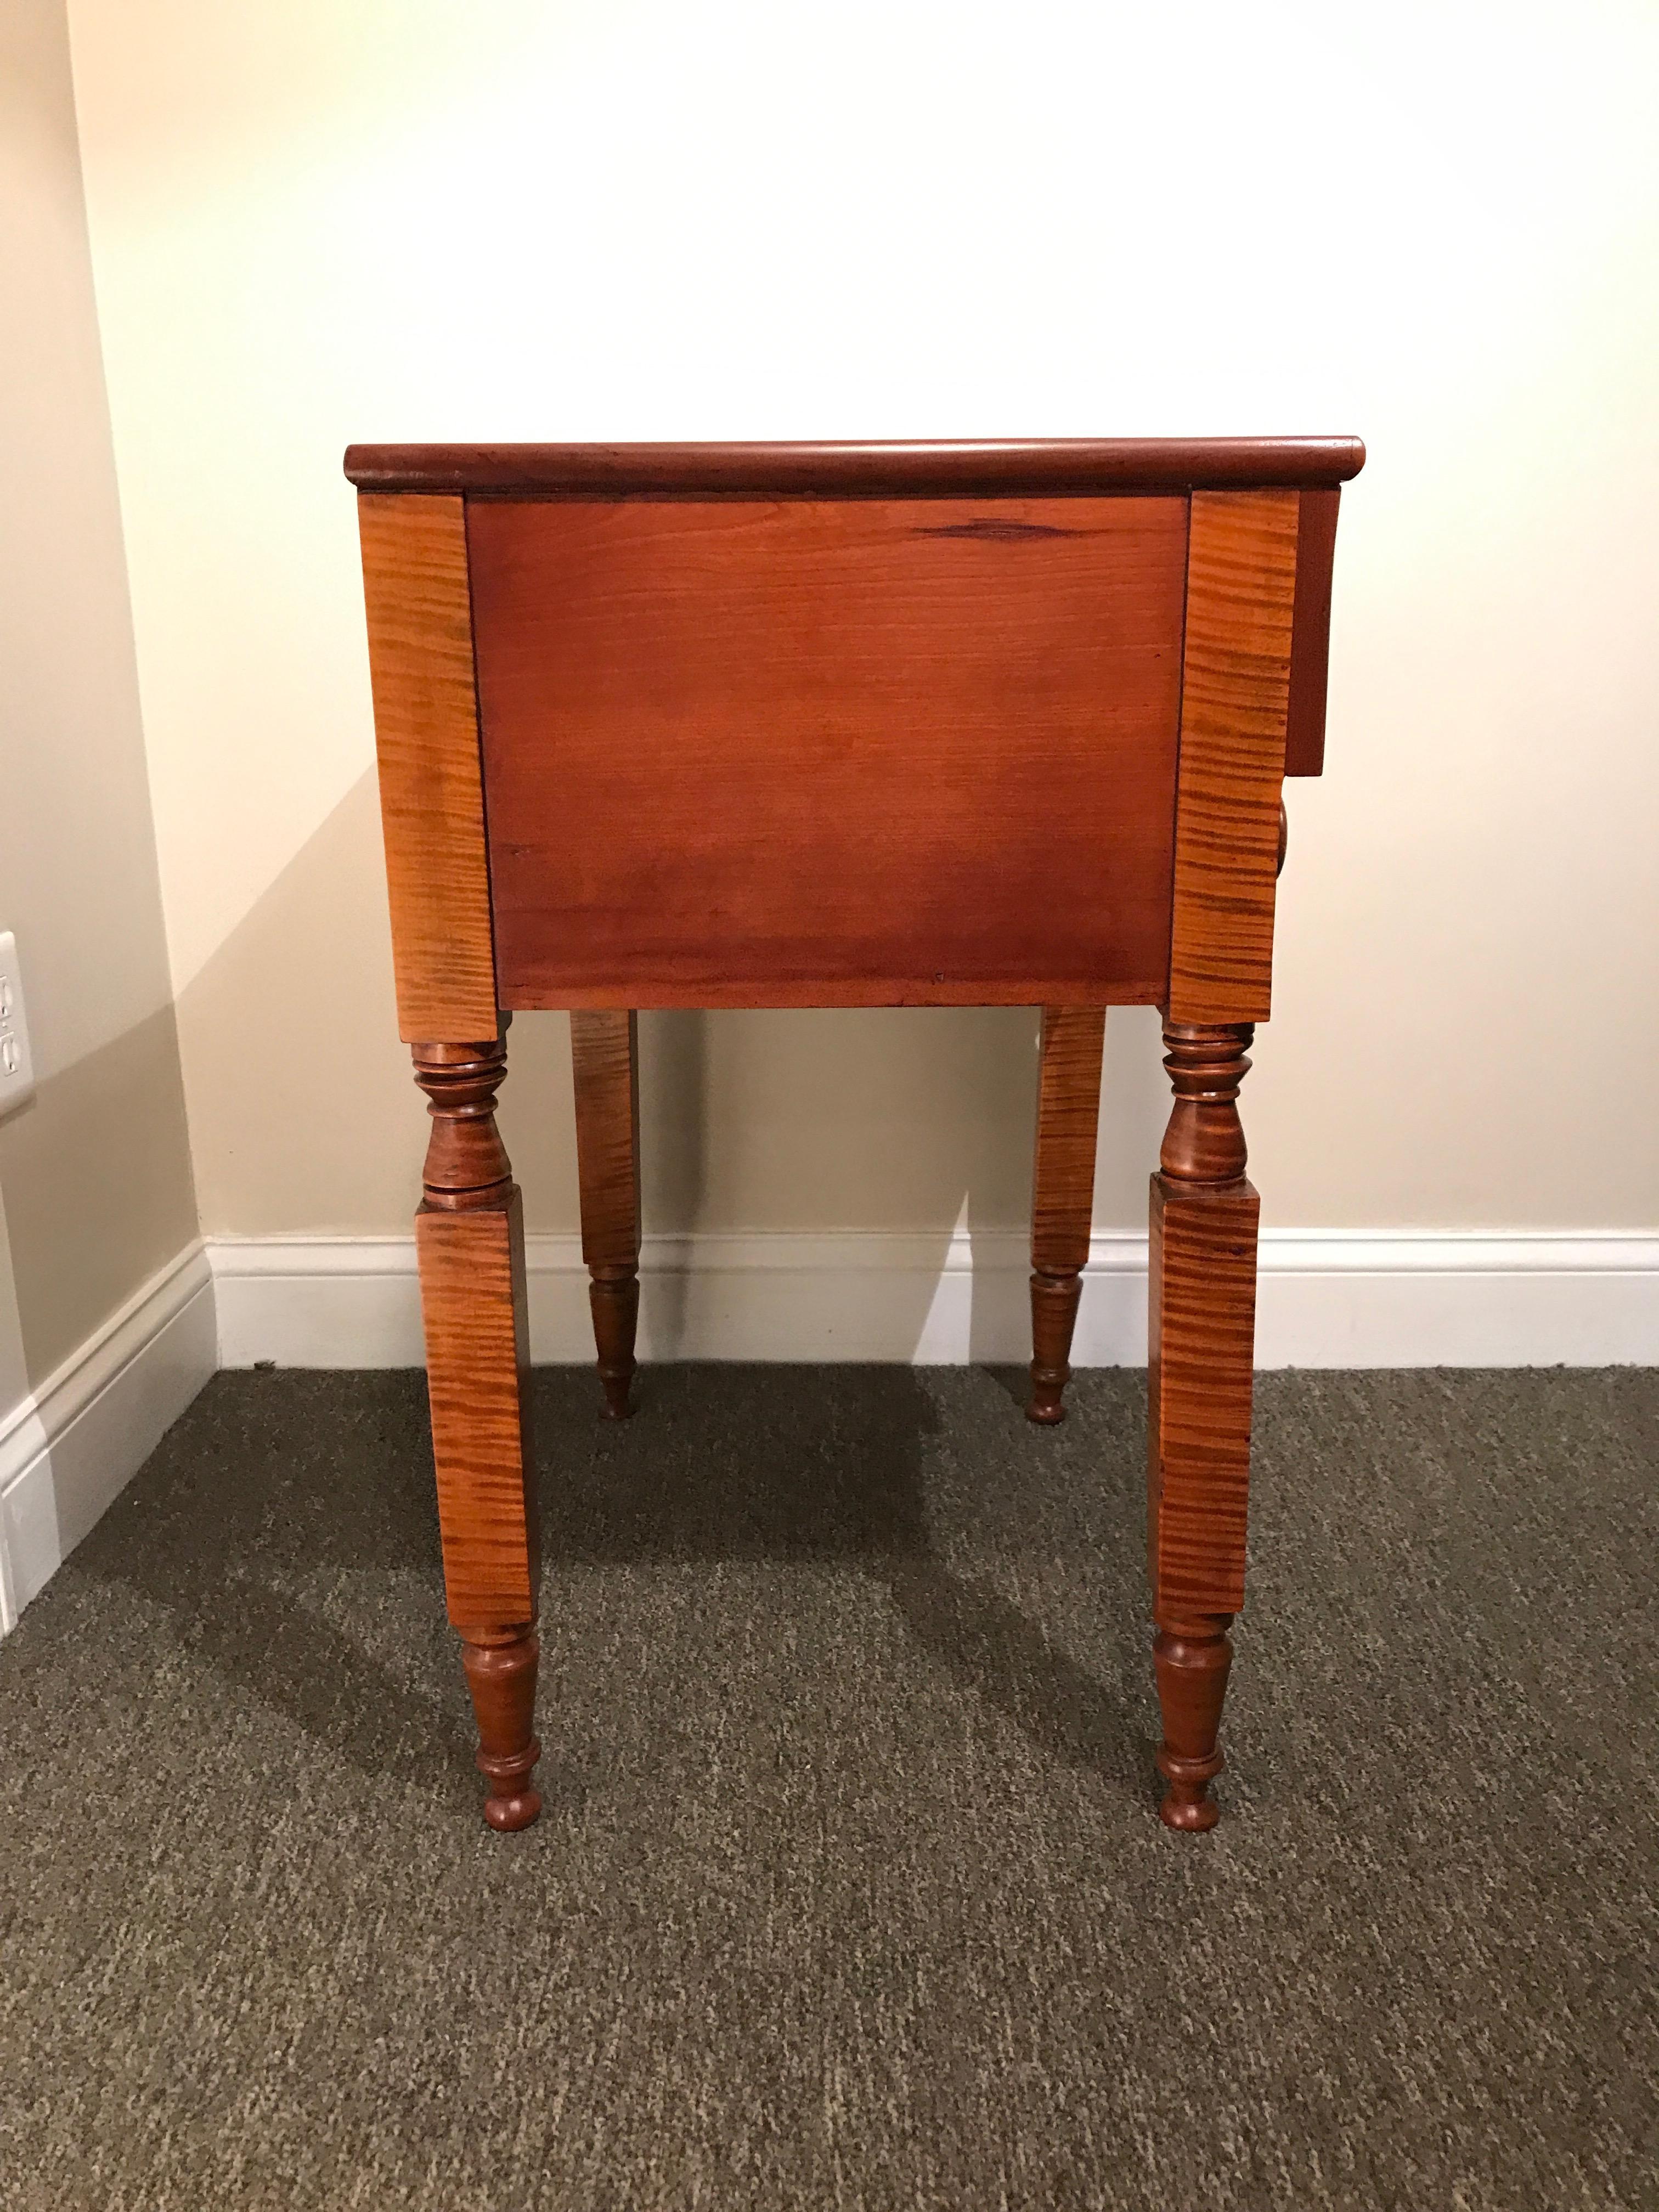 American Empire Empire 2-Drawer Stand in Tiger Maple, Cherry and Flamed Mahogany, circa 1820